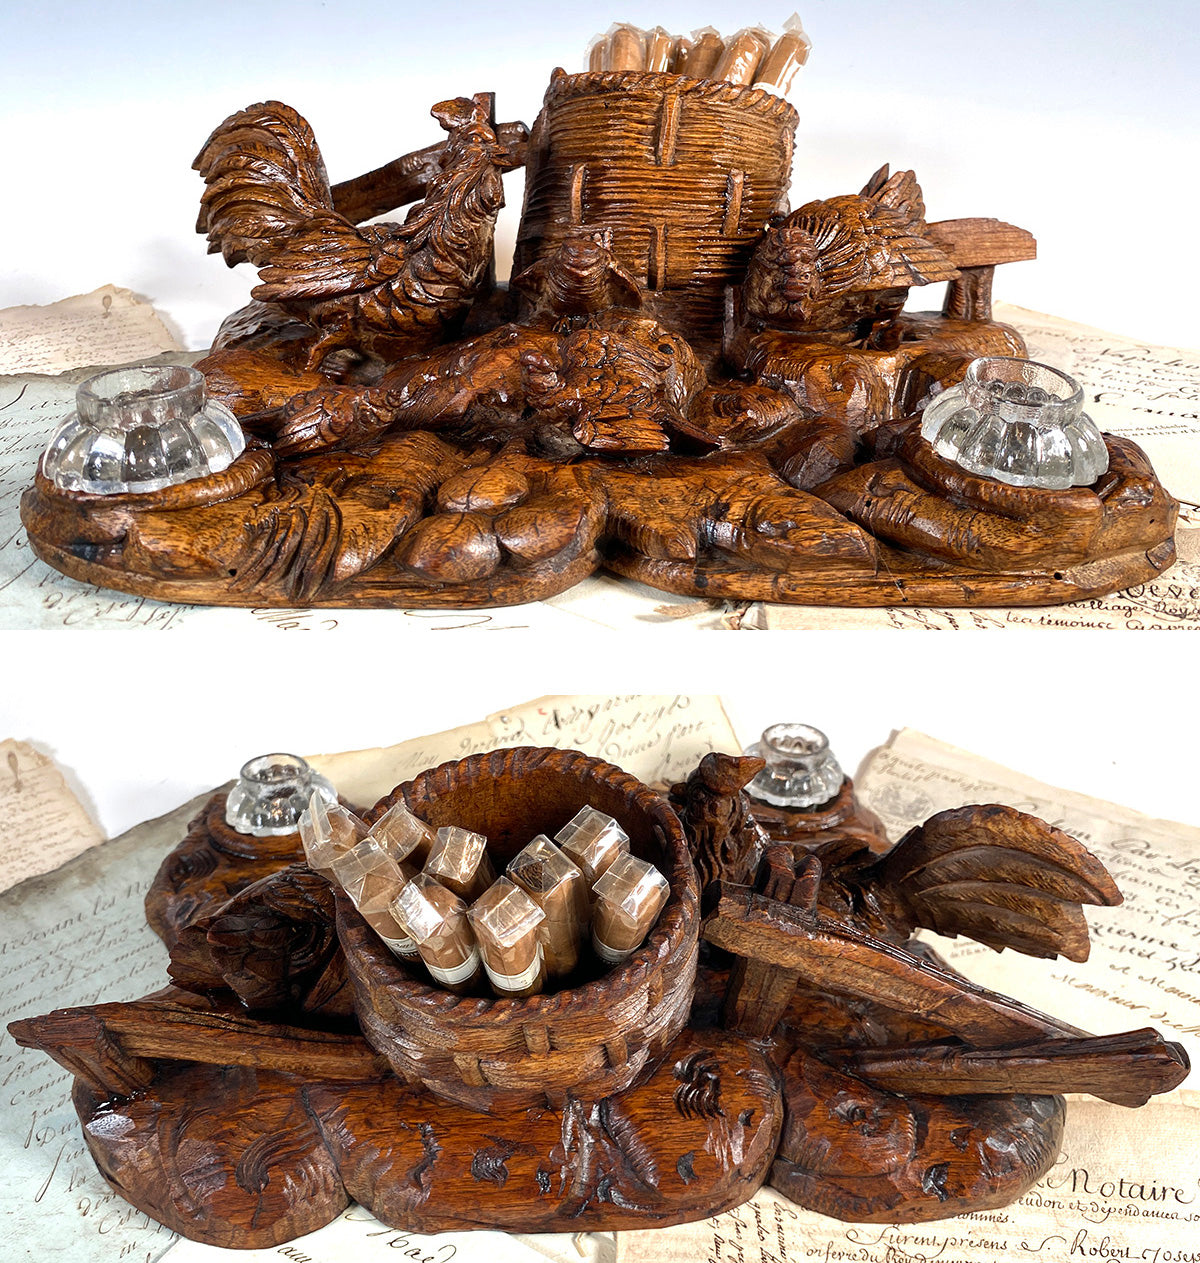 Superb Antique Swiss Black Forest 13.5" Double Inkwell or Cigar Caddy, Rooster and Hen and Chicks